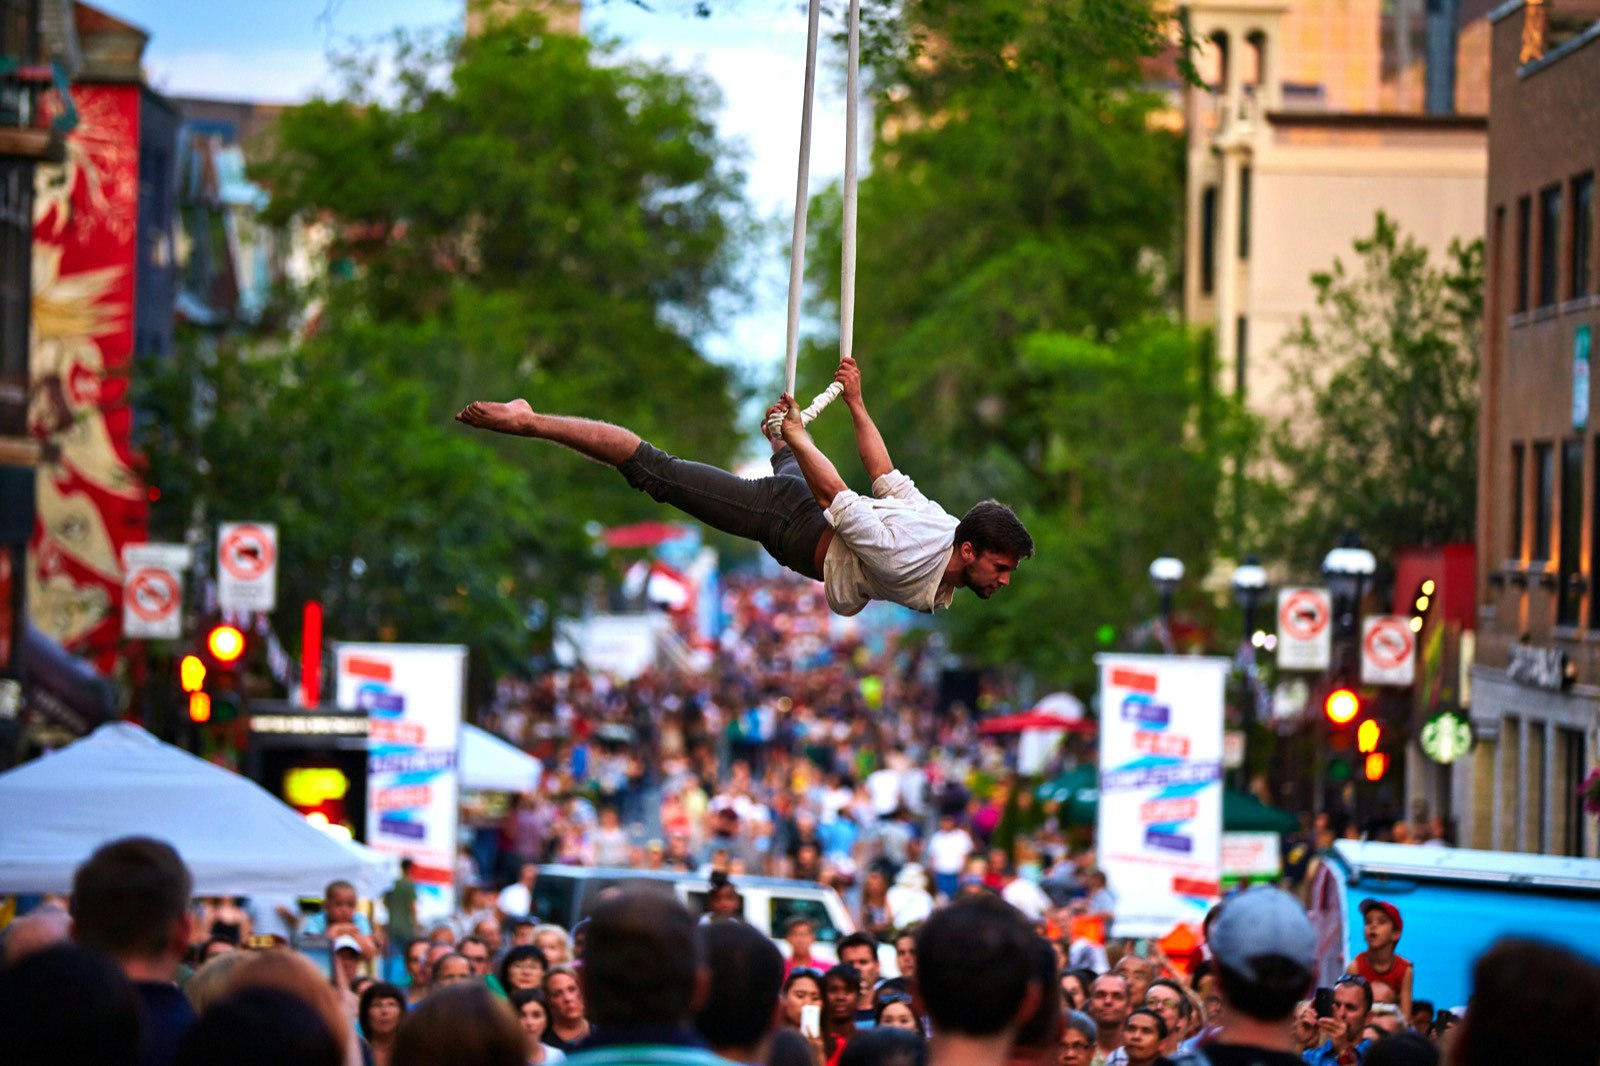 A circus acrobat is suspended above a crowd of spectators in the streets of Montreal